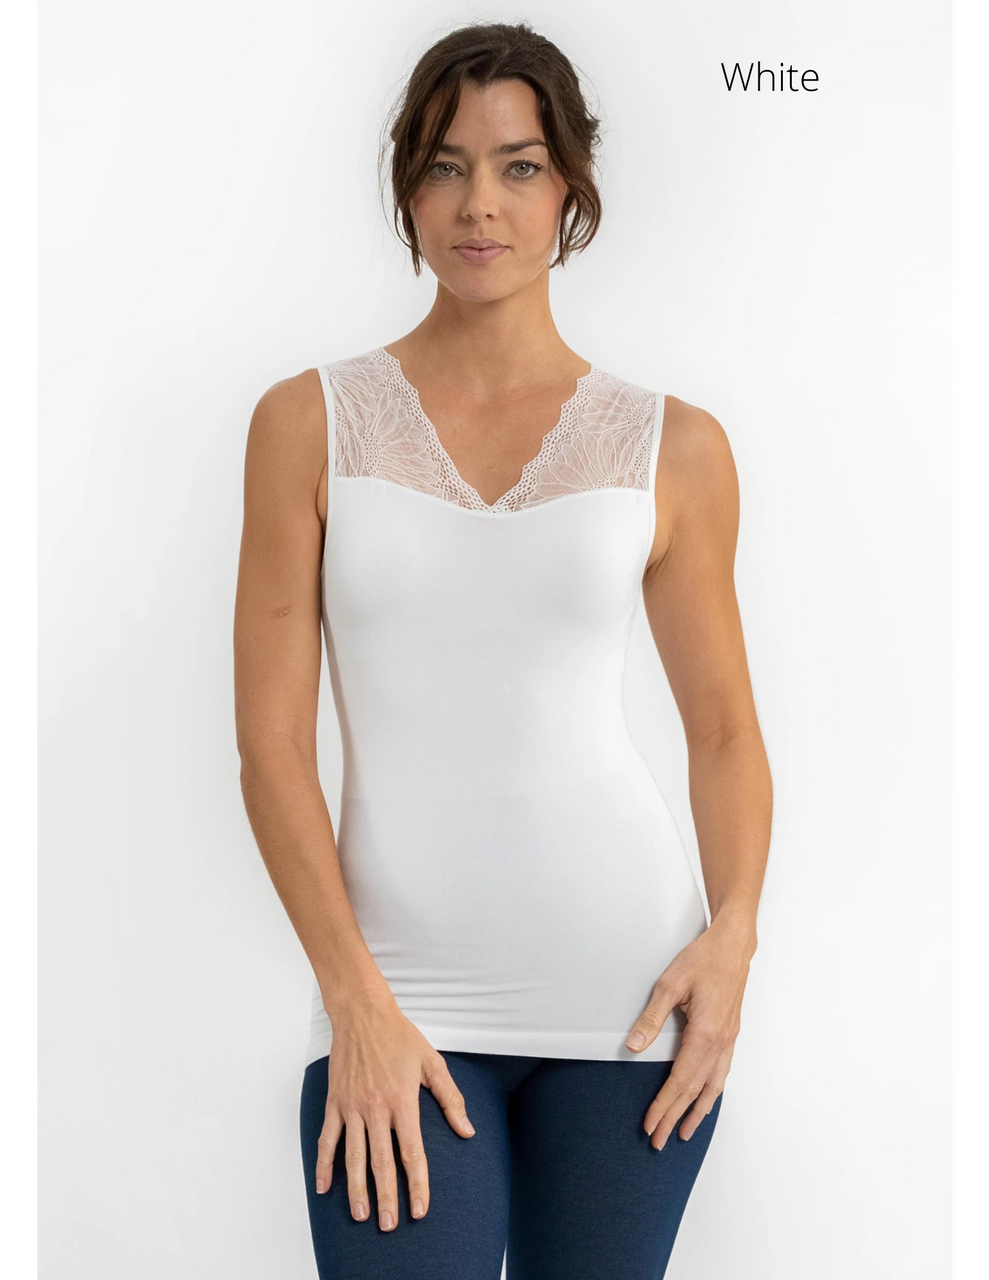 Elietian Lace Neck Seamless One-Size Camisole Tank